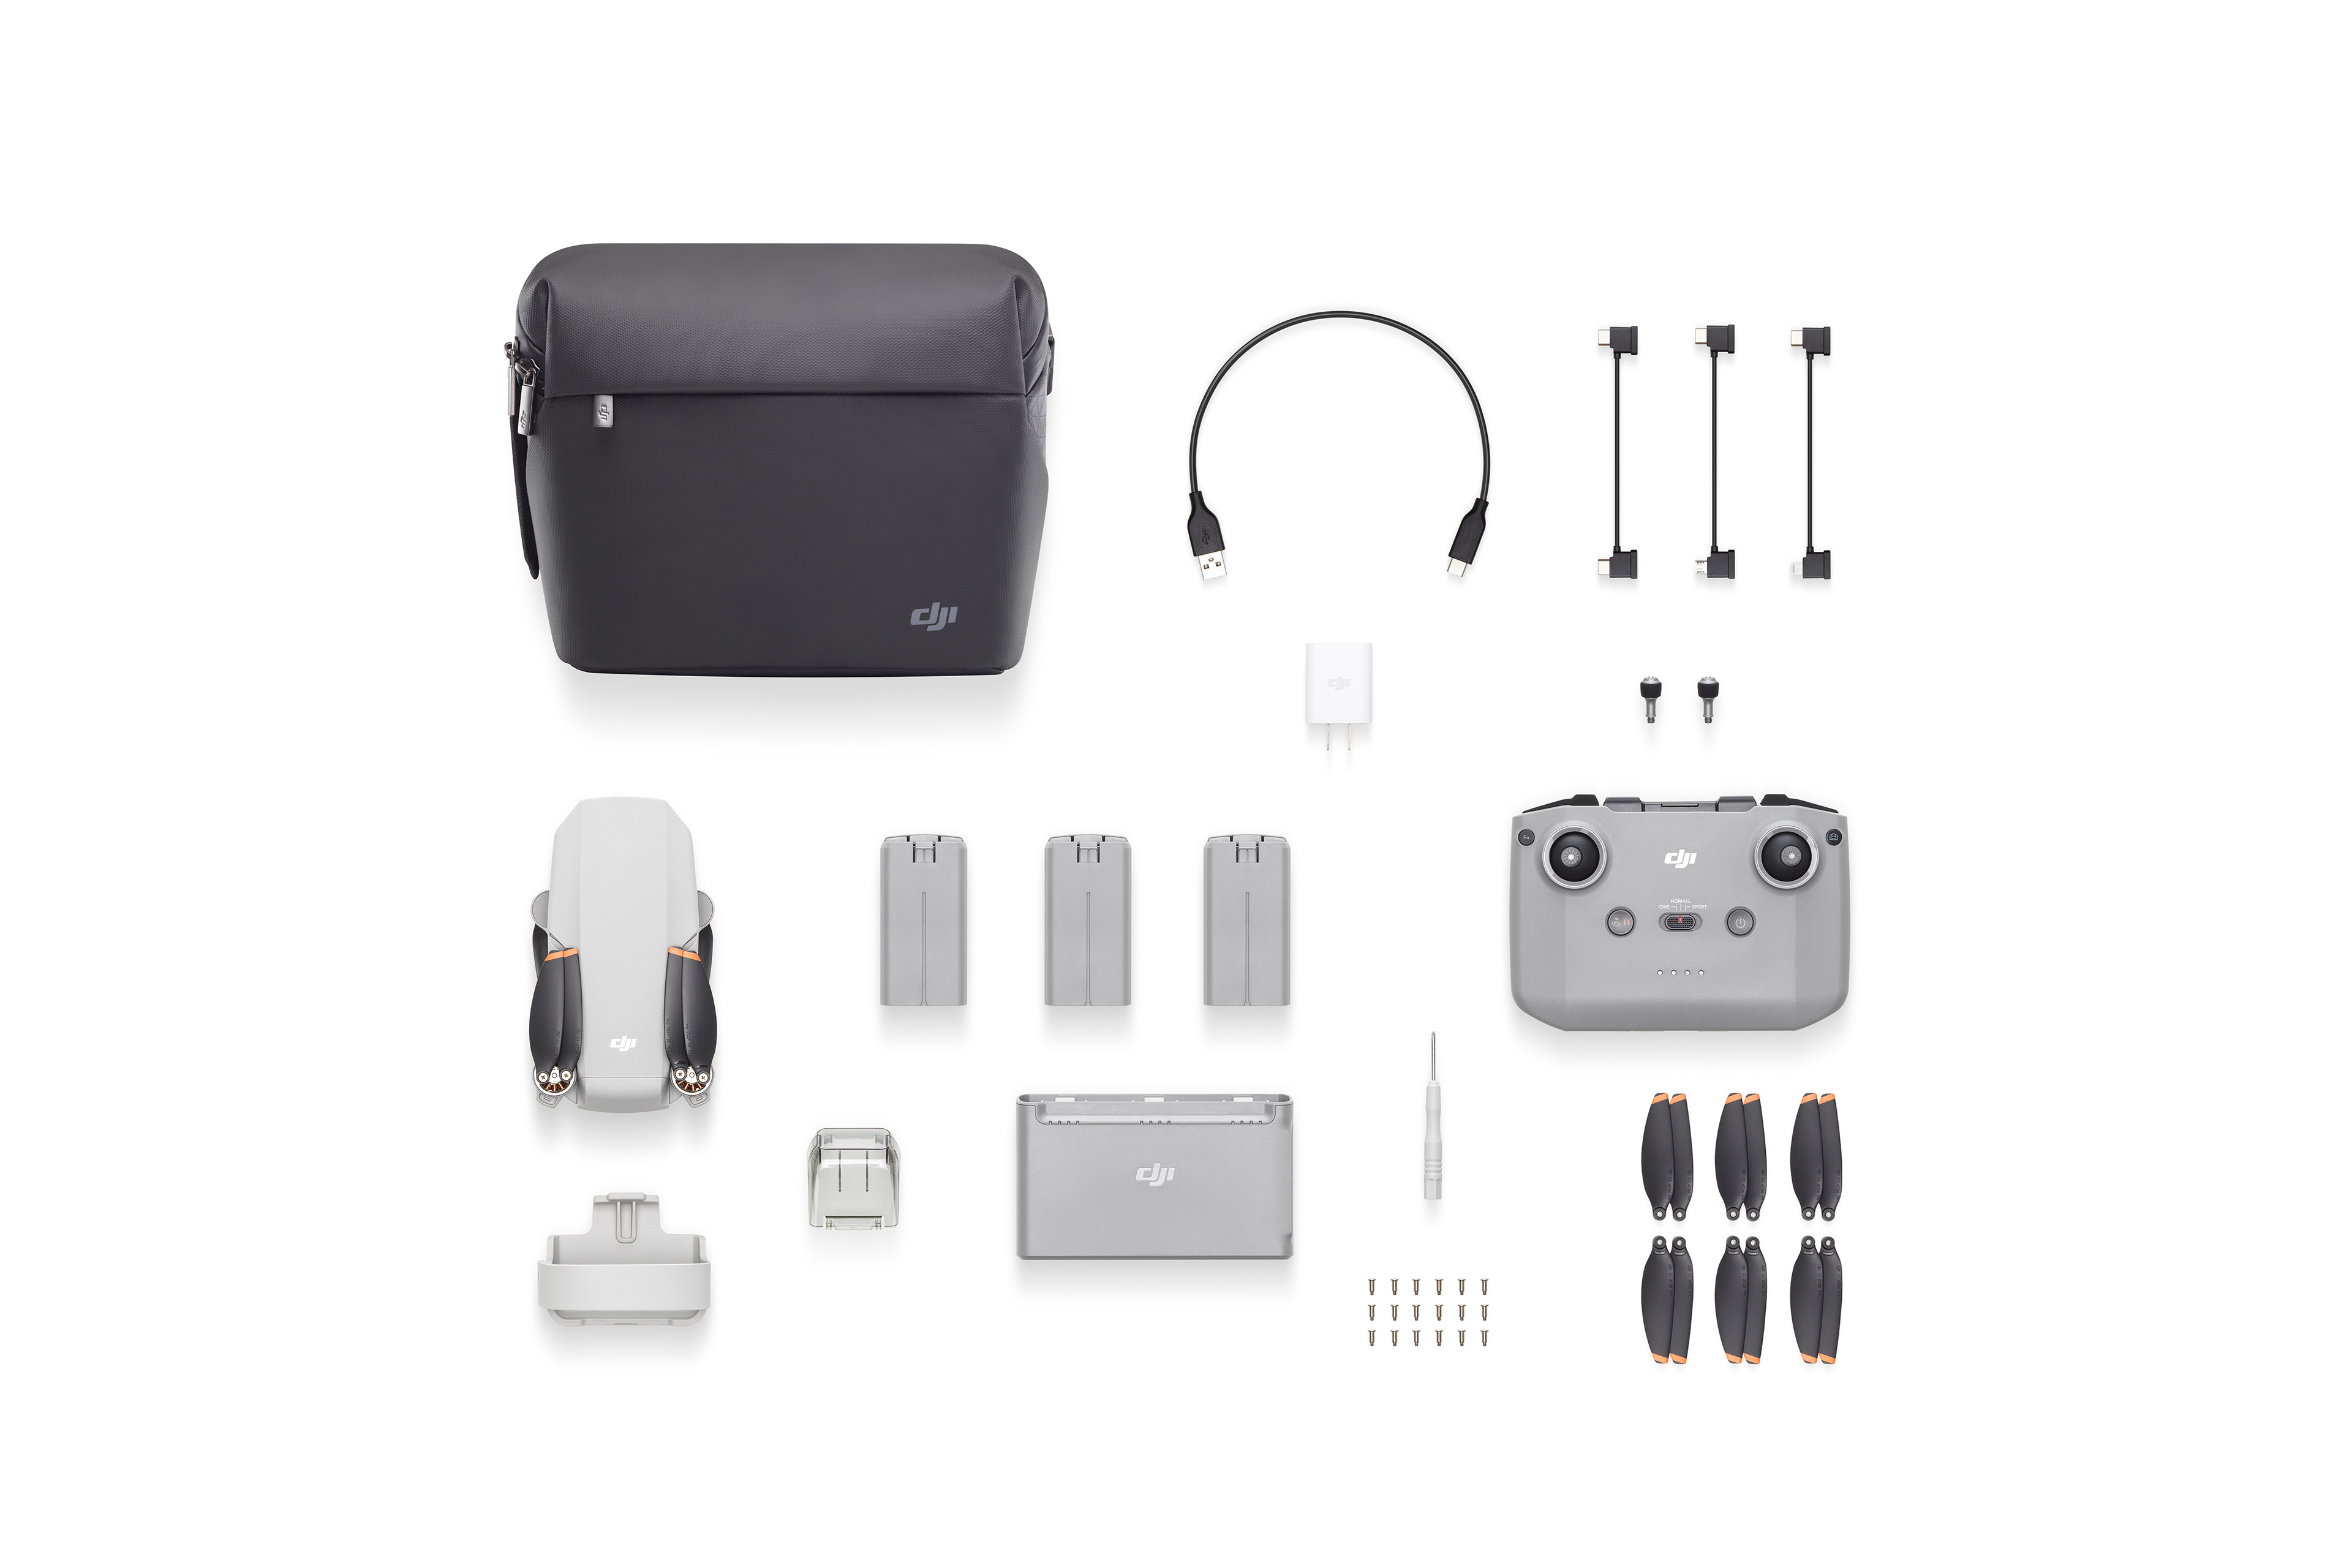 DJI Pocket 2 packs more features and more mics into tiny 4K